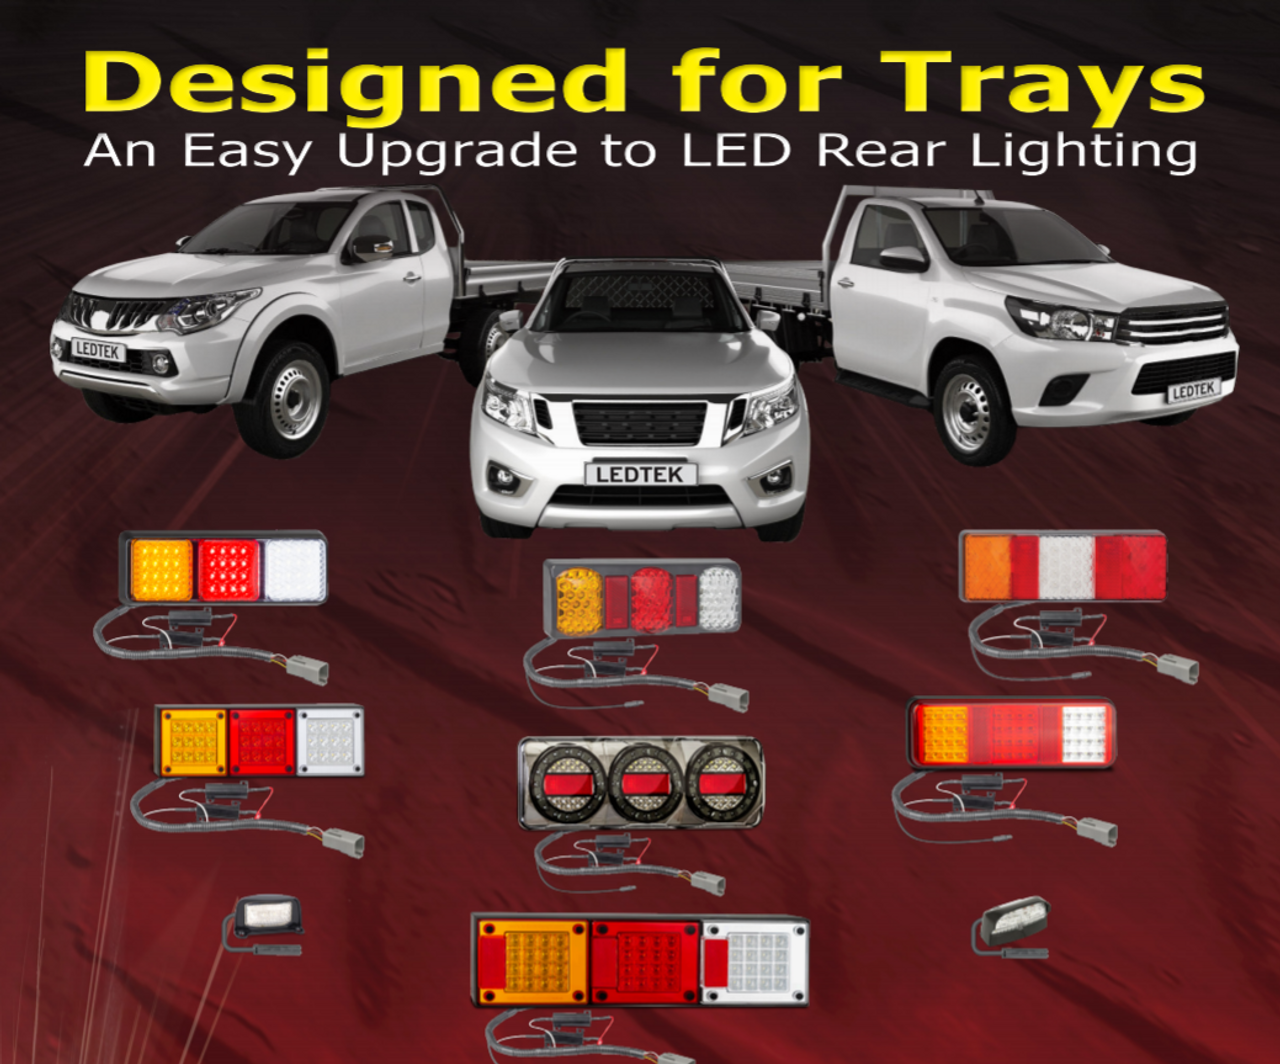 280ARWM2LR12/450+PATCHILUX - Vehicle LED Patch Cable System. Easy LED Upgrade. Designed for Trays. 280 Series Light. Stop, Tail, Indicator and Reverse. 12v Only. Lamp with Conversion Cable. Application to Suit Toyota Hilux. Autolamp. Ultimate LED.